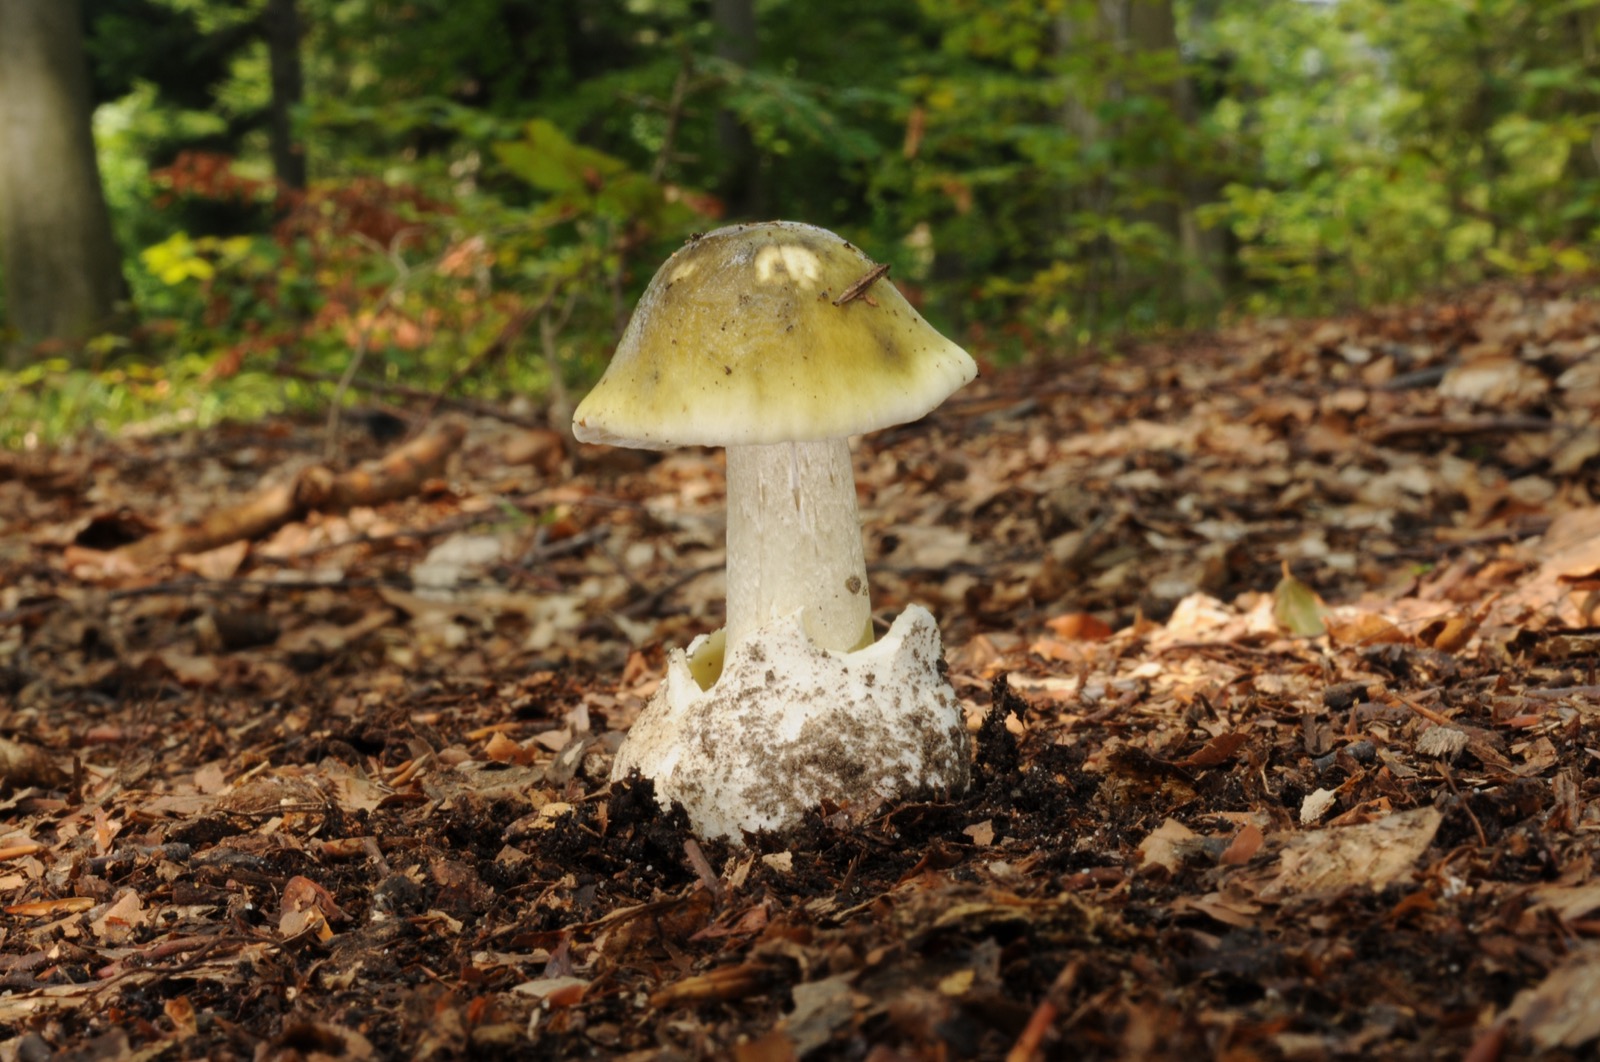 a light brown mushroom with a domed cap sprouts from the brown leaves of a forest floor